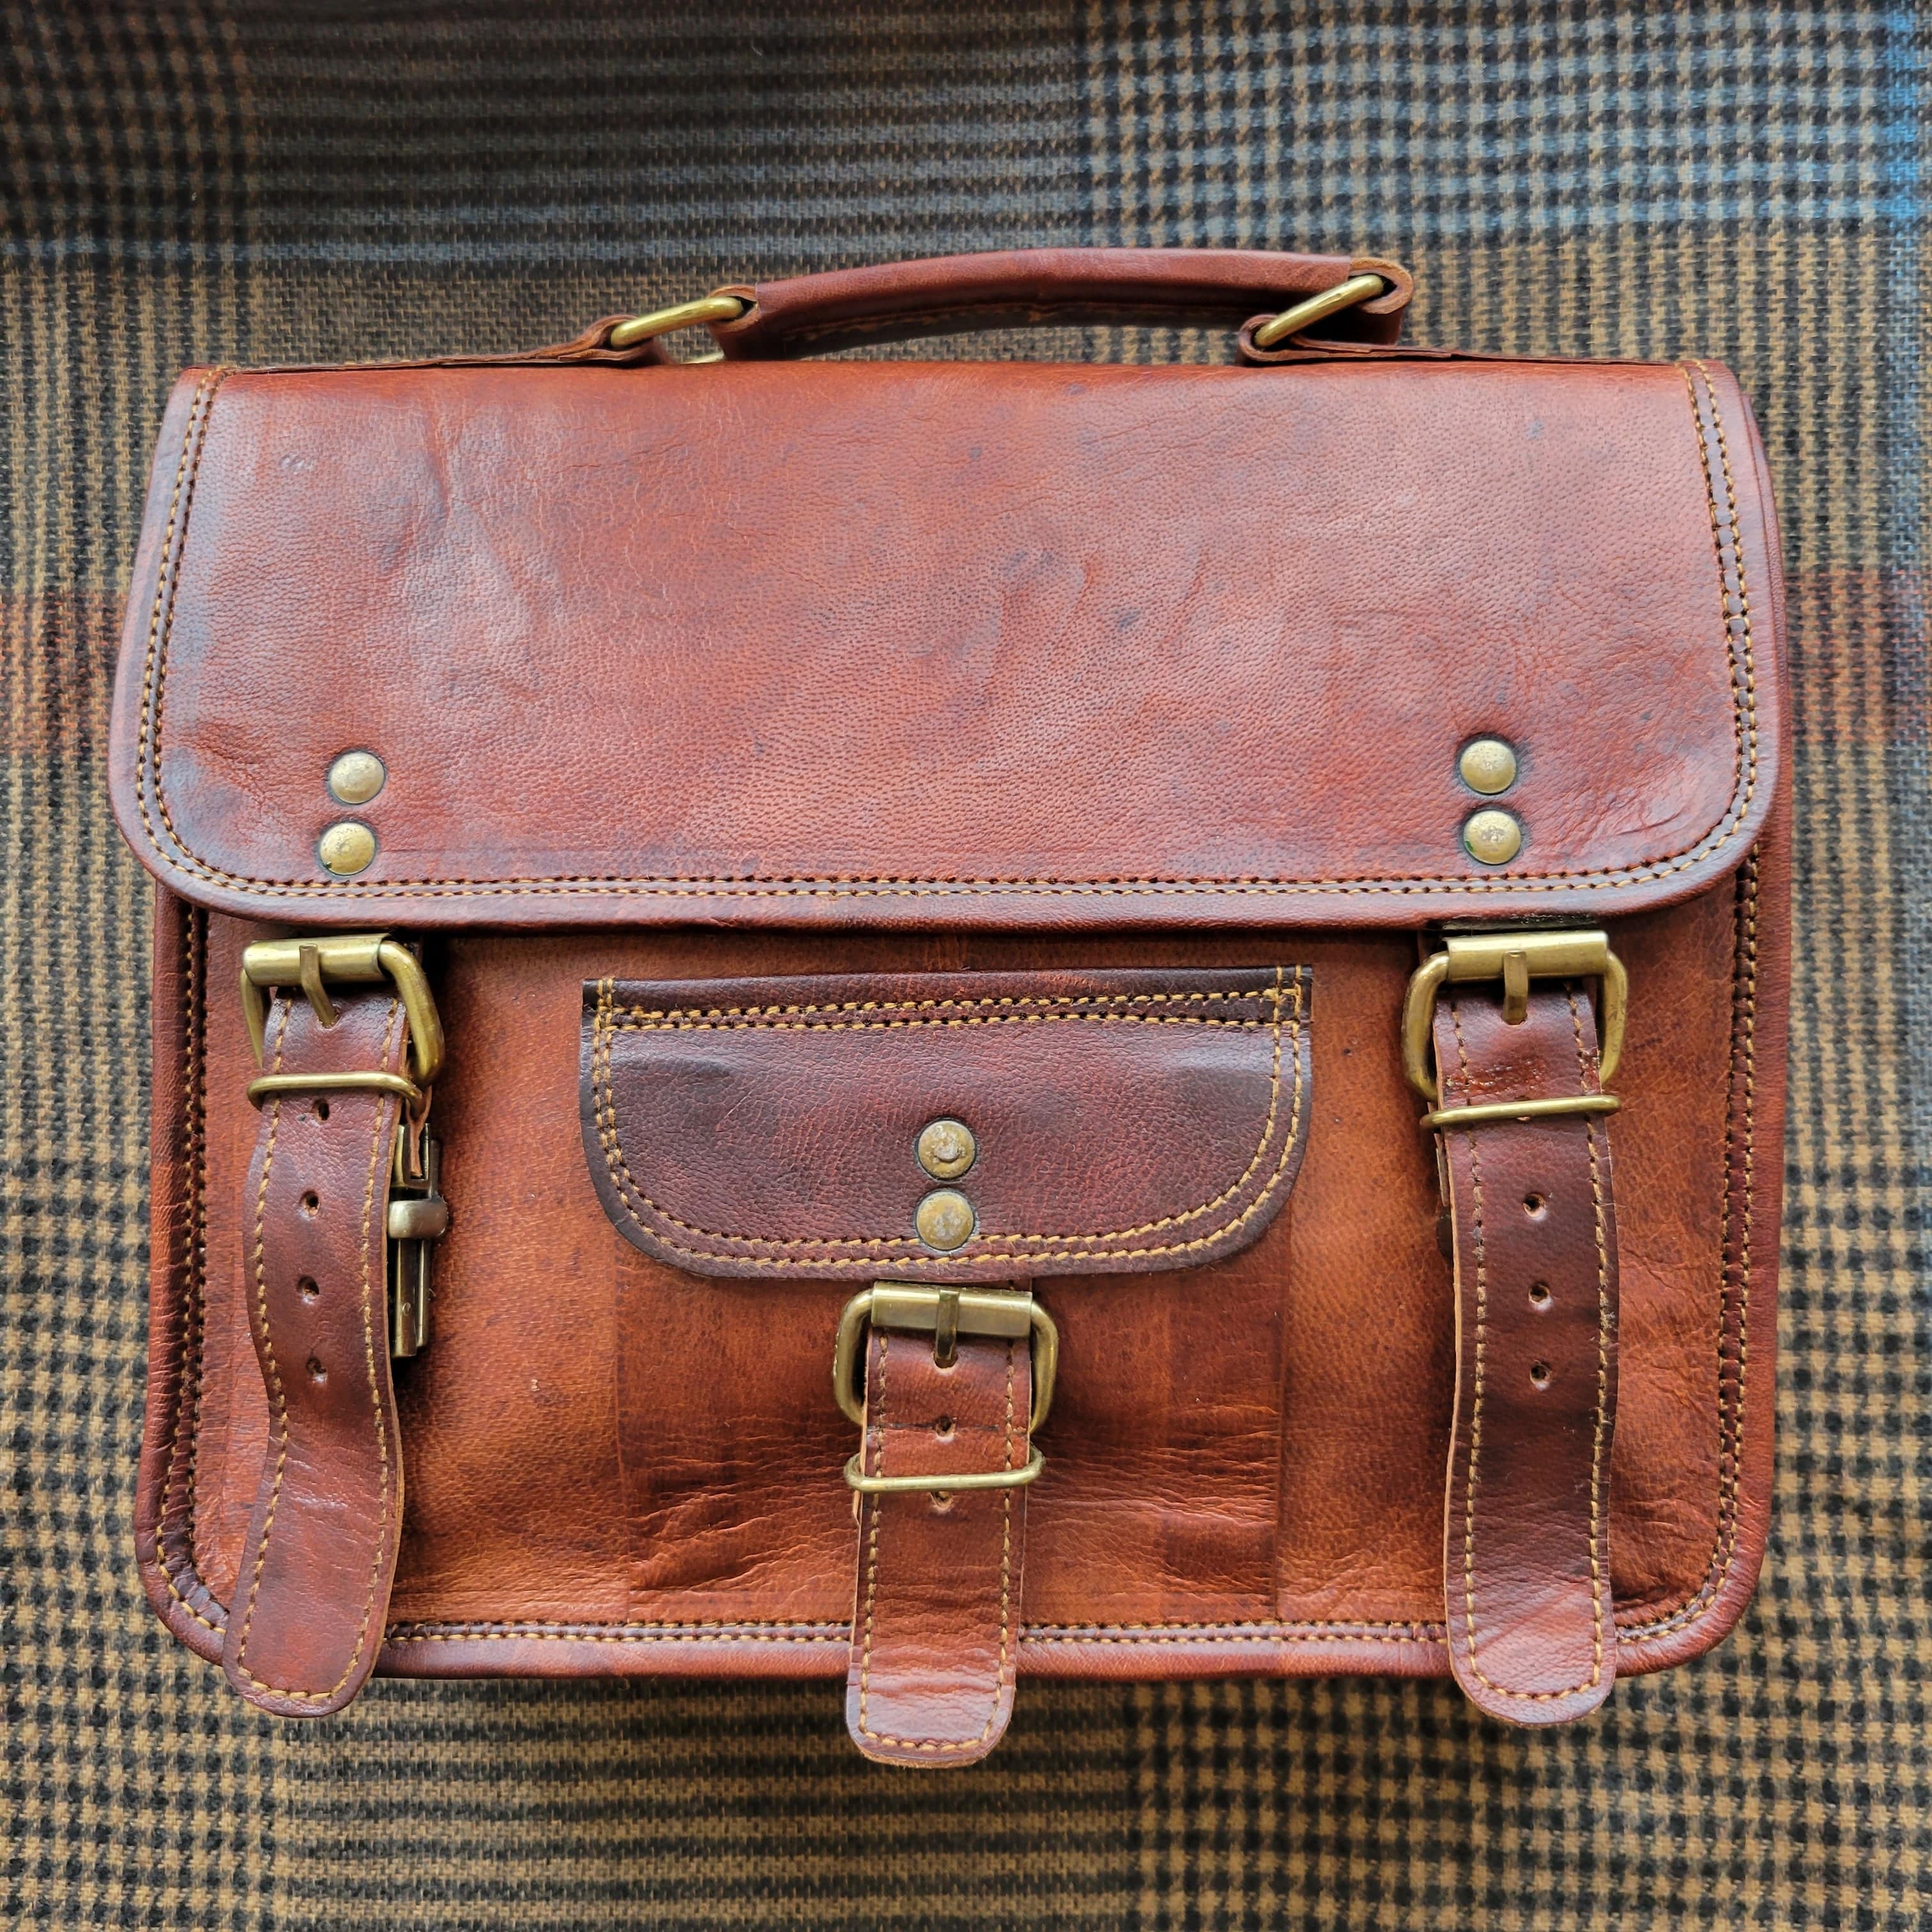 11" WIDE SATCHEL - Out of the Blue